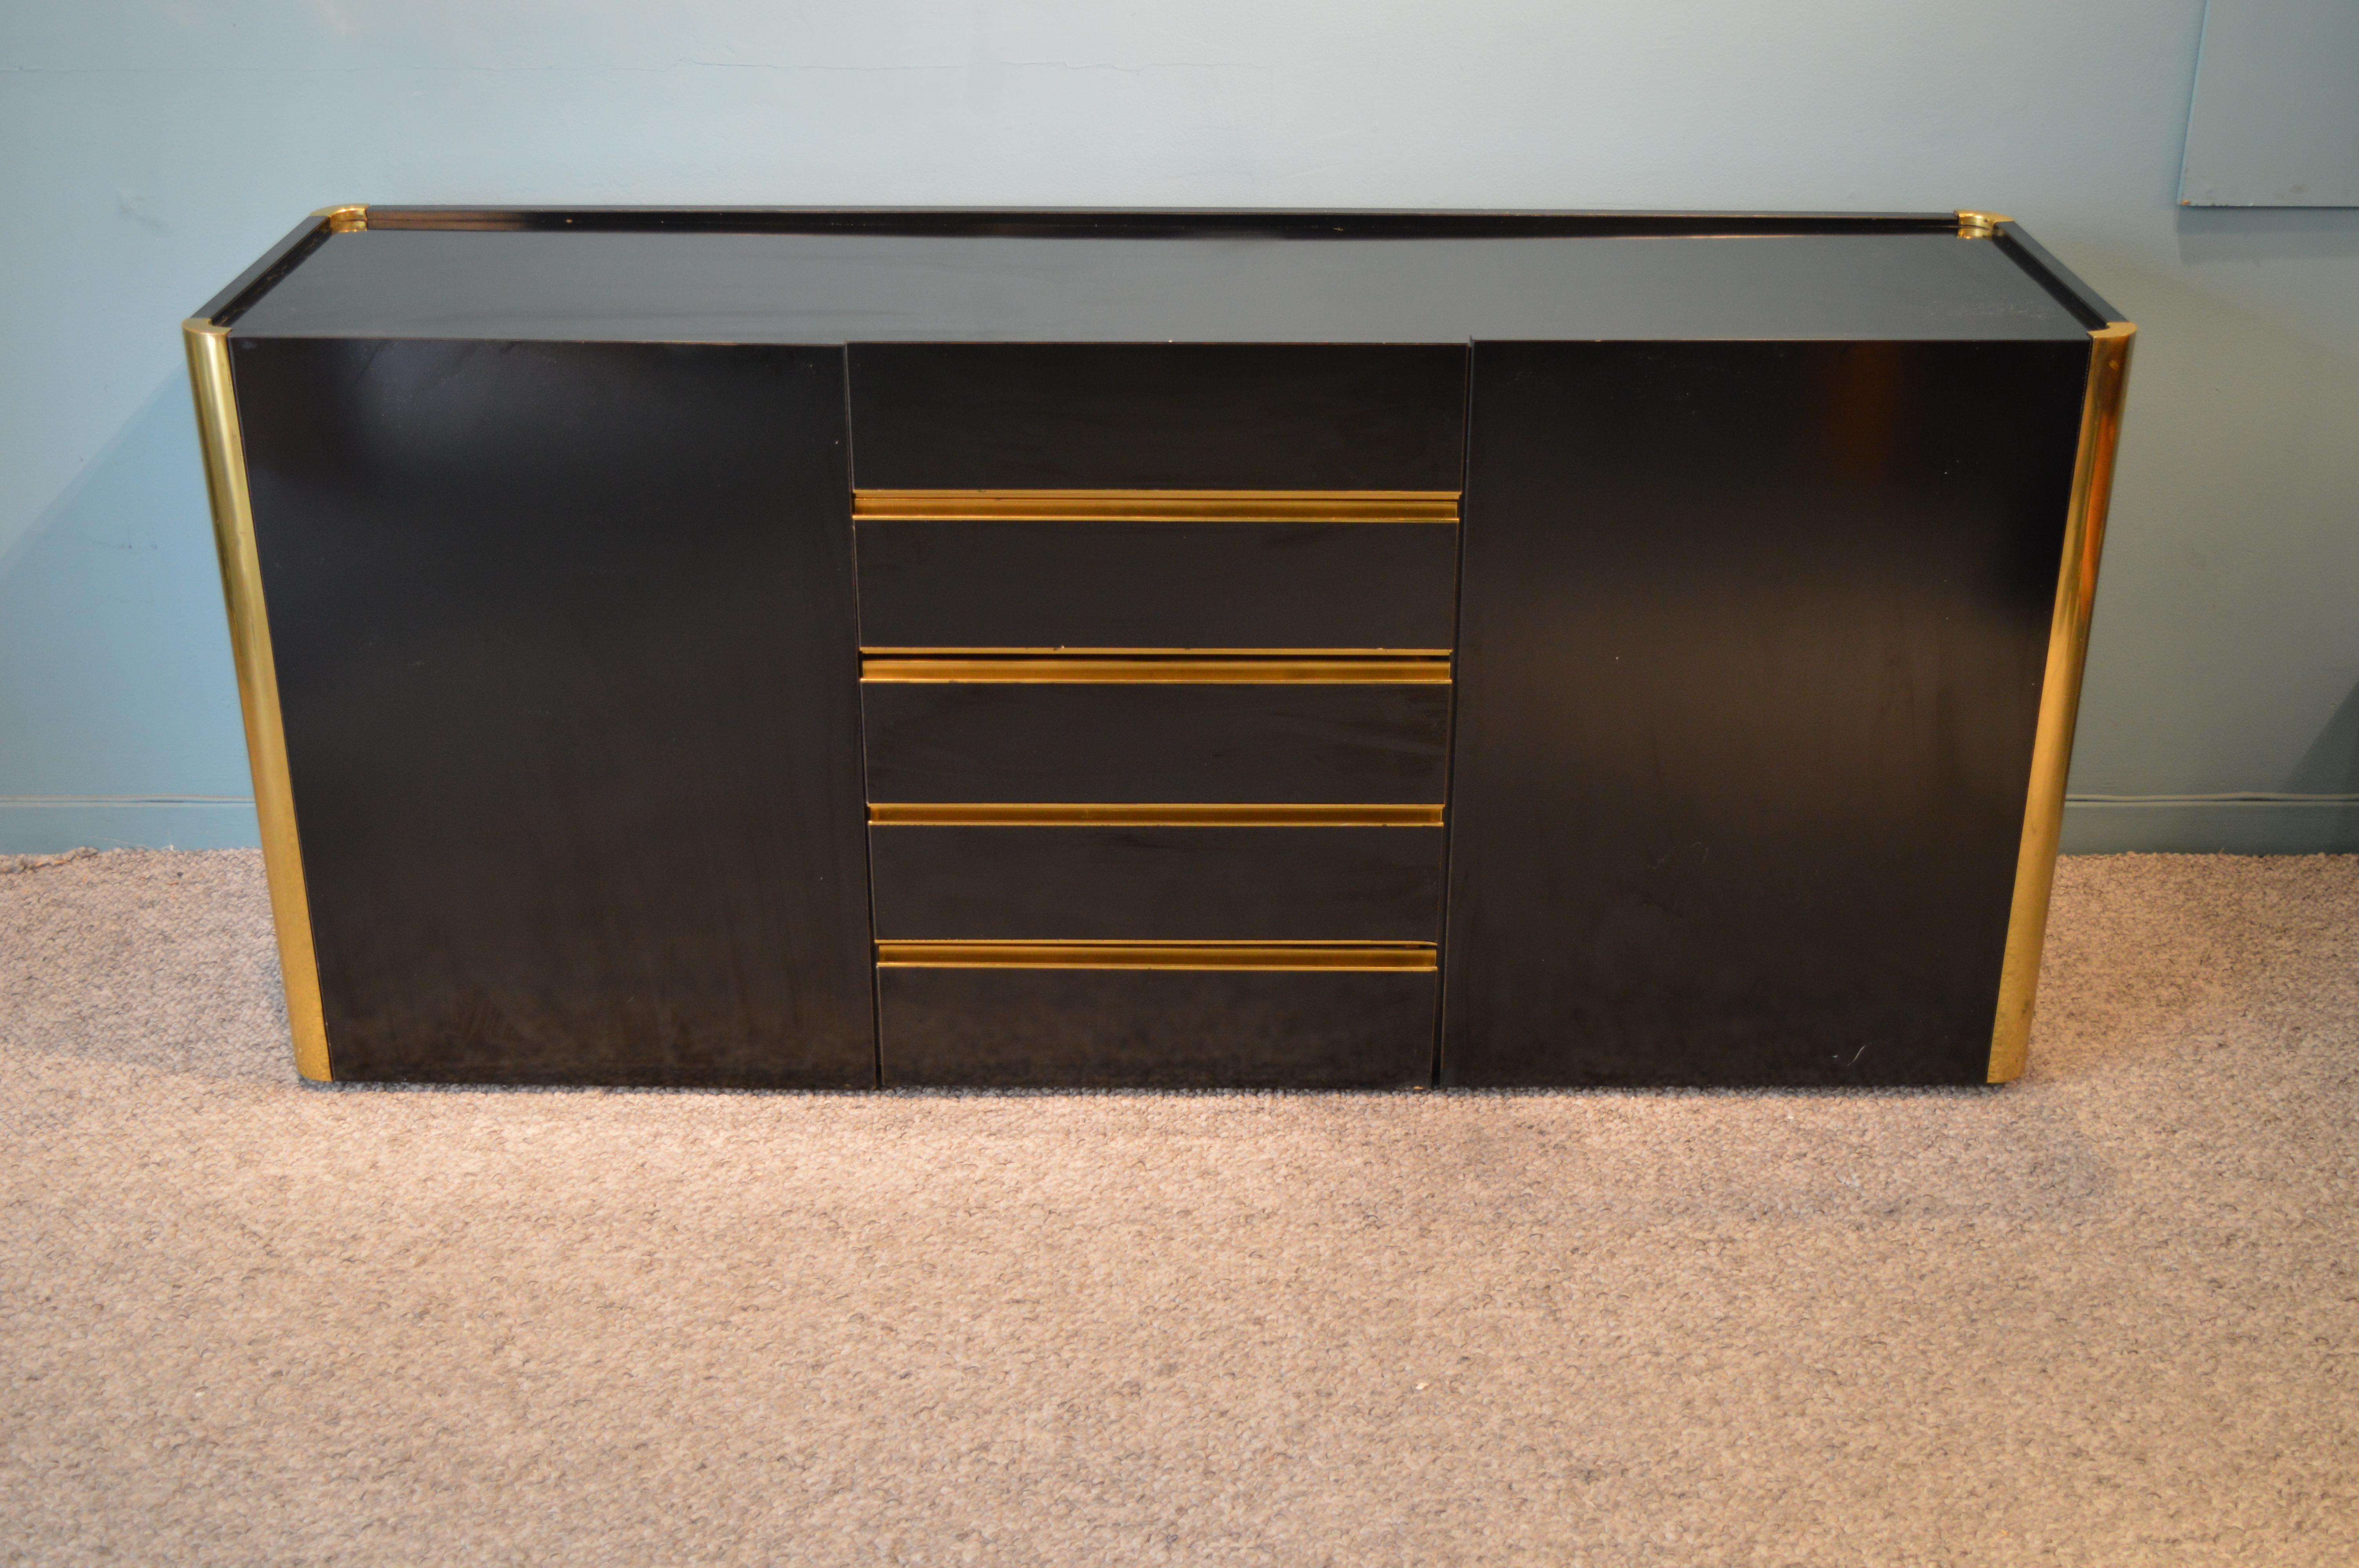 Sideboard by willy Rizzo for Mario Sabot.
Heavy quality laminated wood and elegant brass details.
Italian work circa 1972.